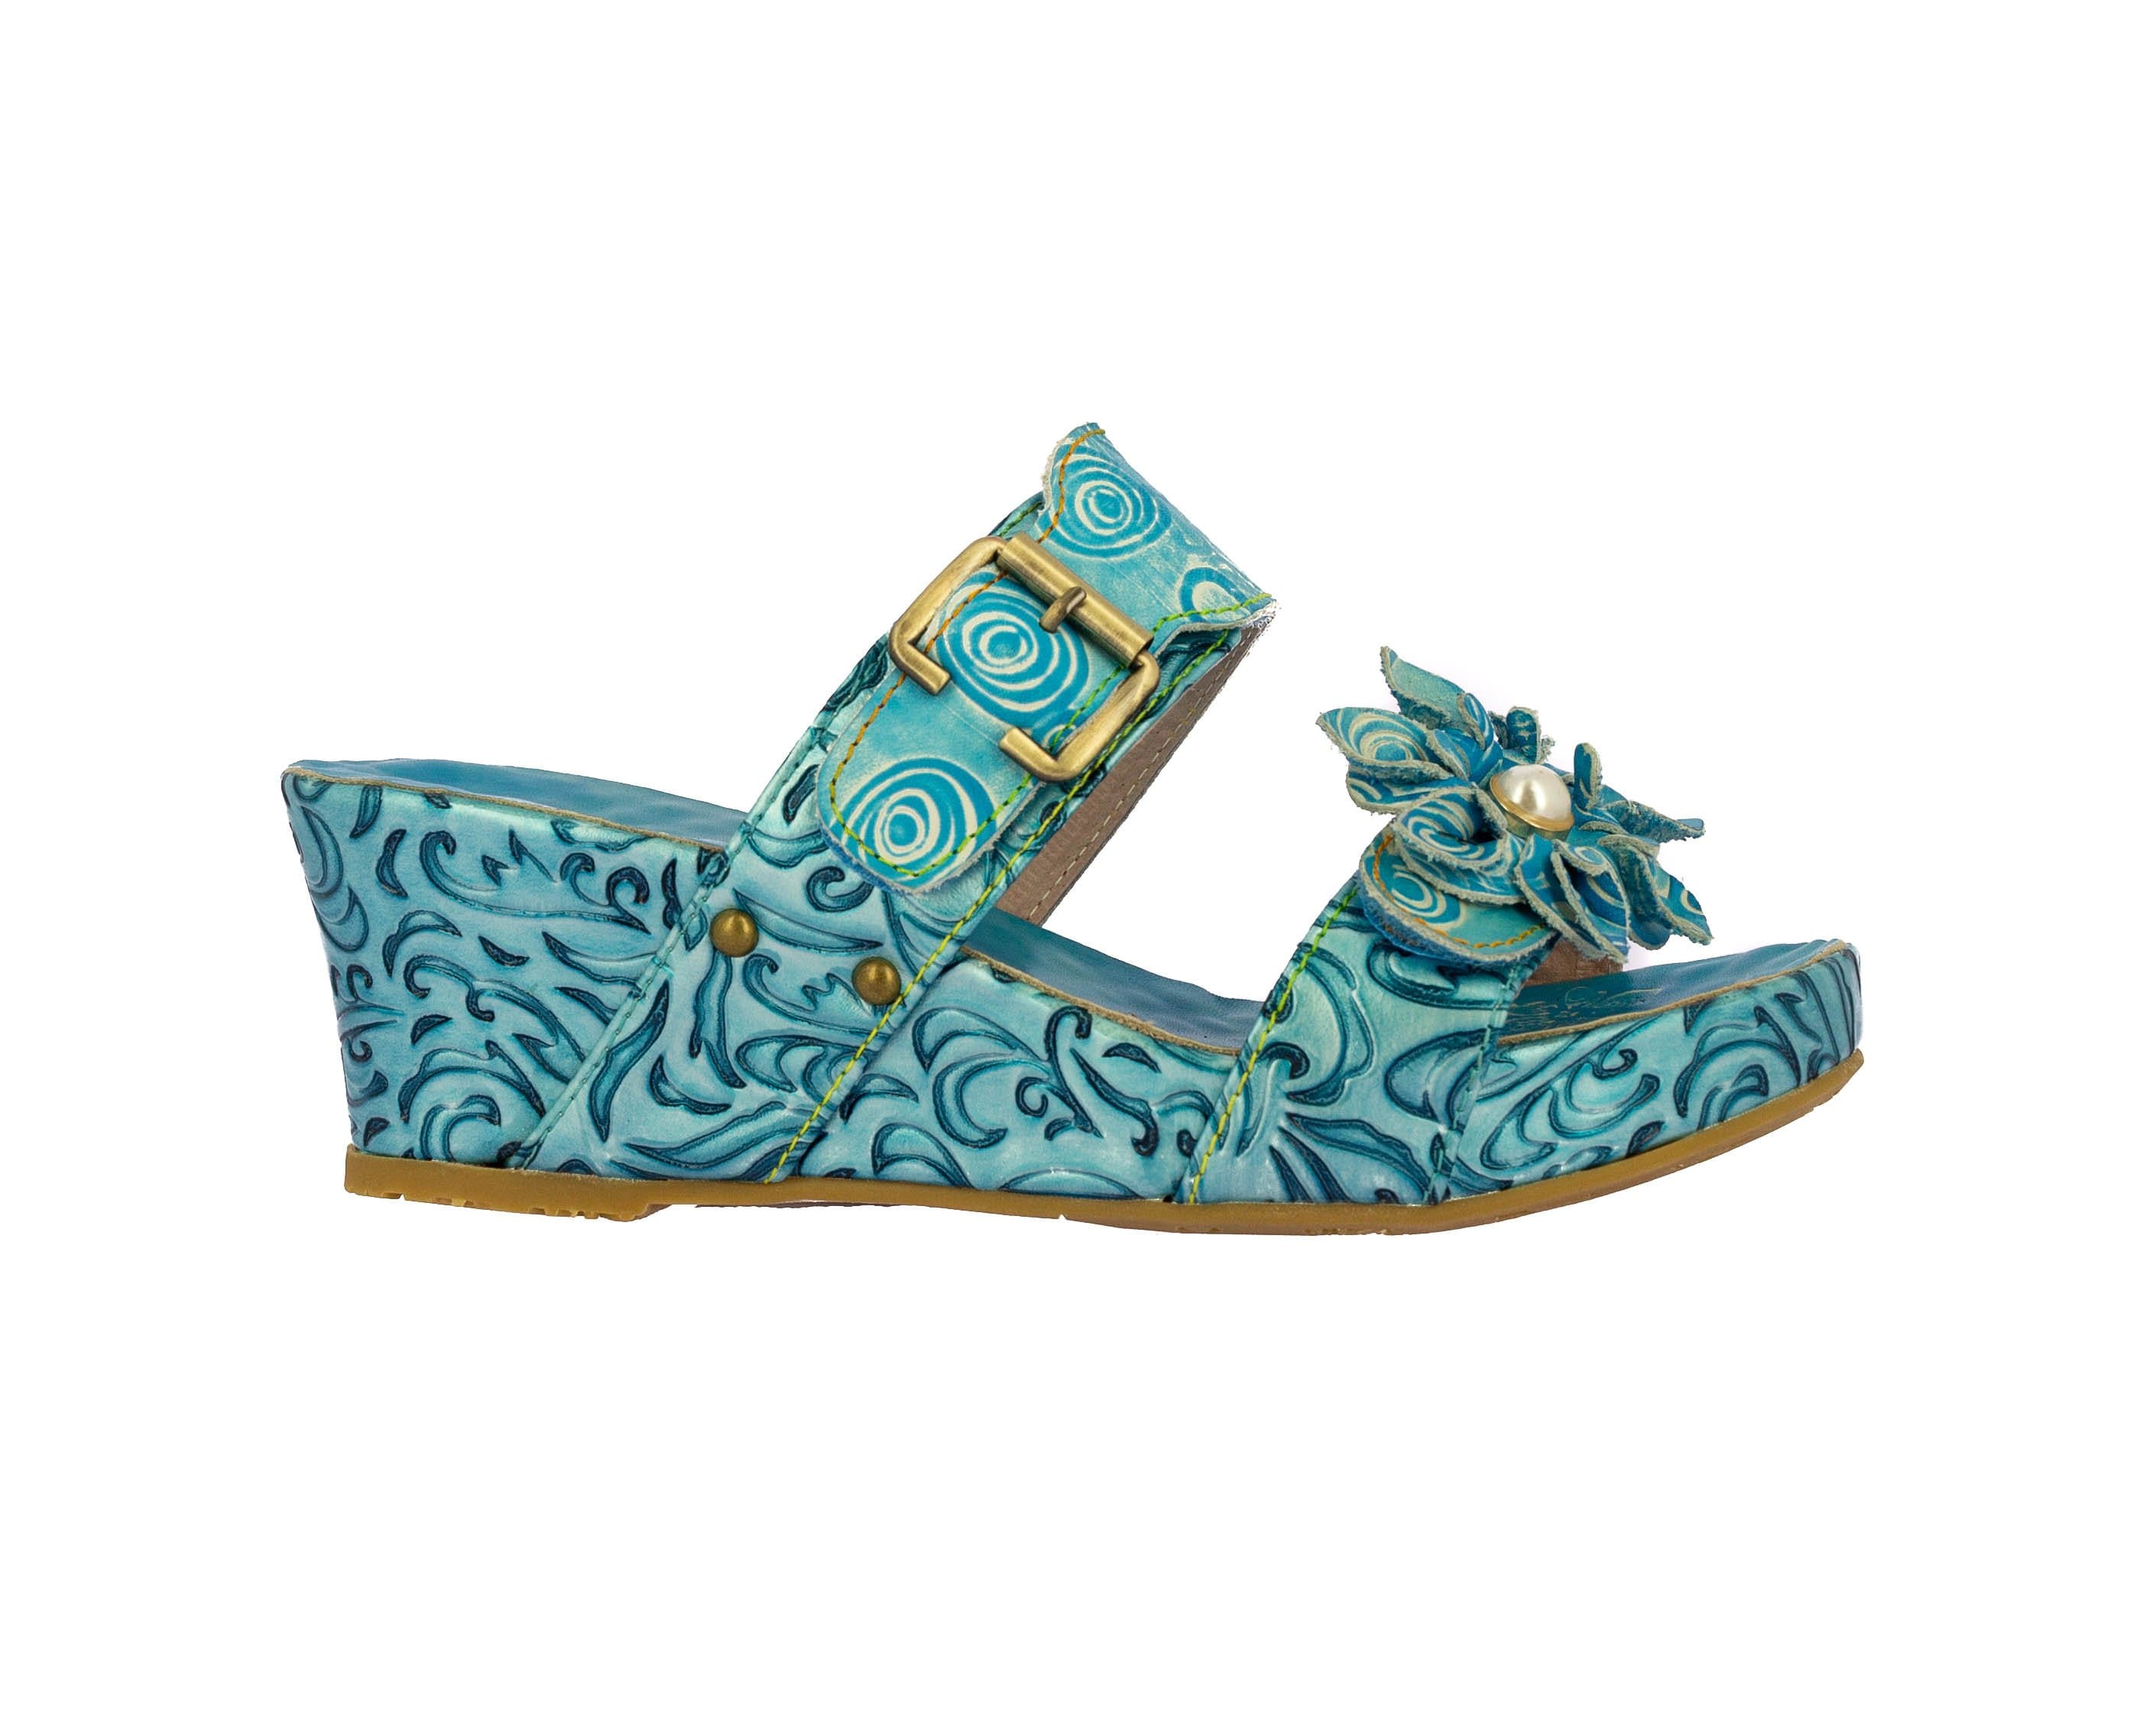 FACDIAO 21 - 35 / TURQUOISE - Buty z muliny